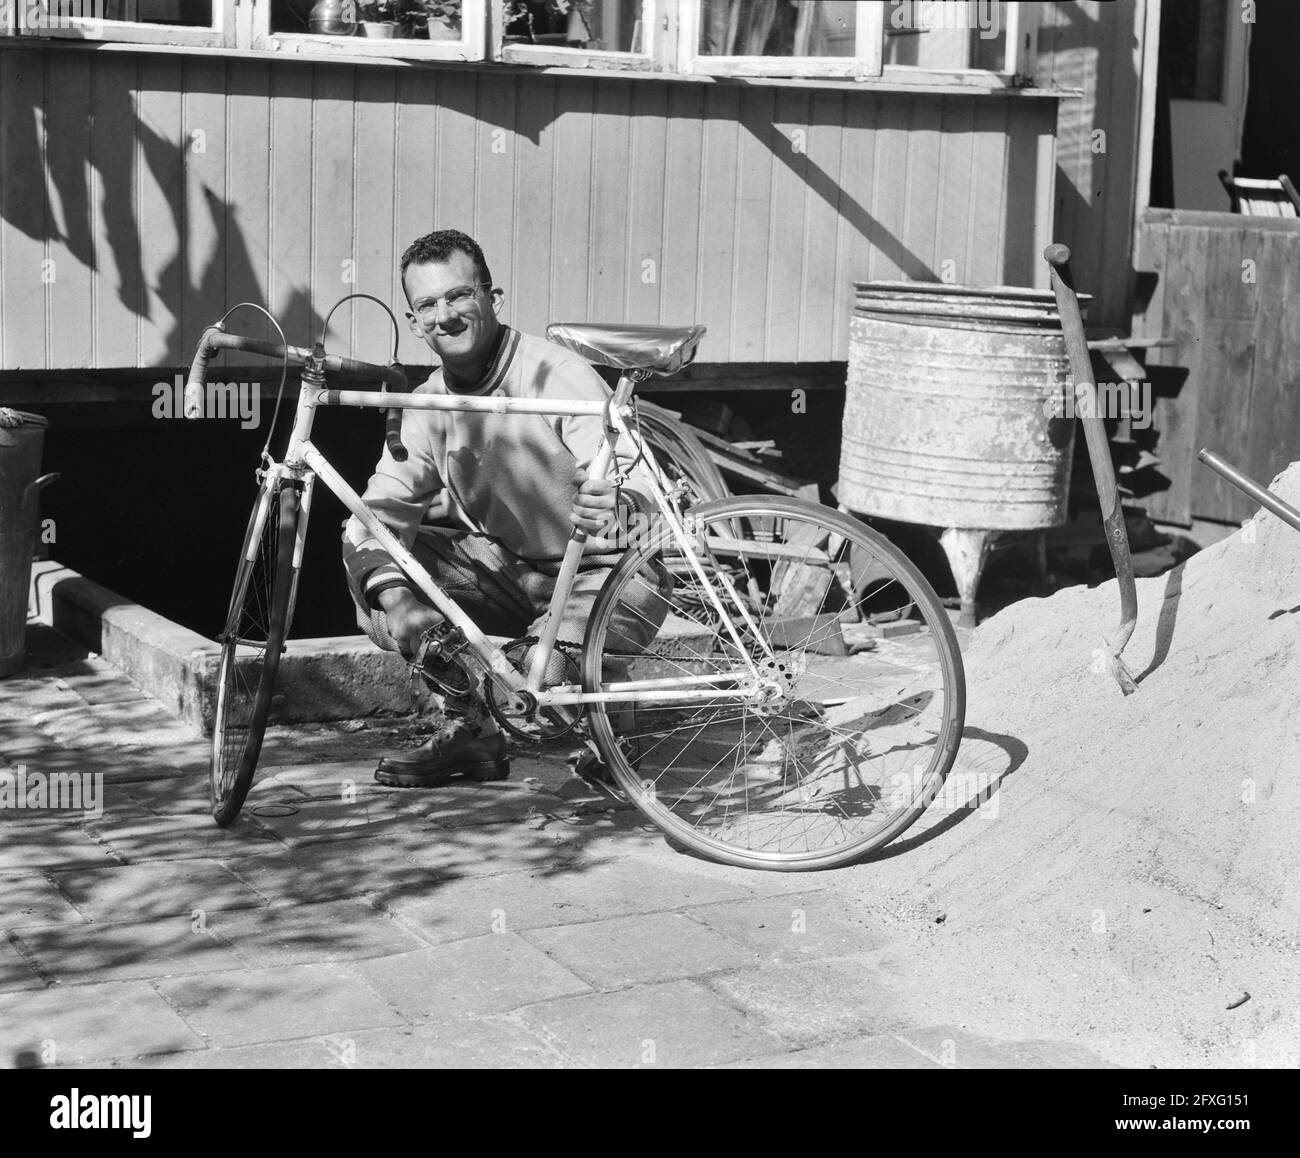 Van Heusden with tandem bicycle in the store, September 1, 1952, racing bikes, The Netherlands, 20th century press agency photo, news to remember, documentary, historic photography 1945-1990, visual stories, human history of the Twentieth Century, capturing moments in time Stock Photo